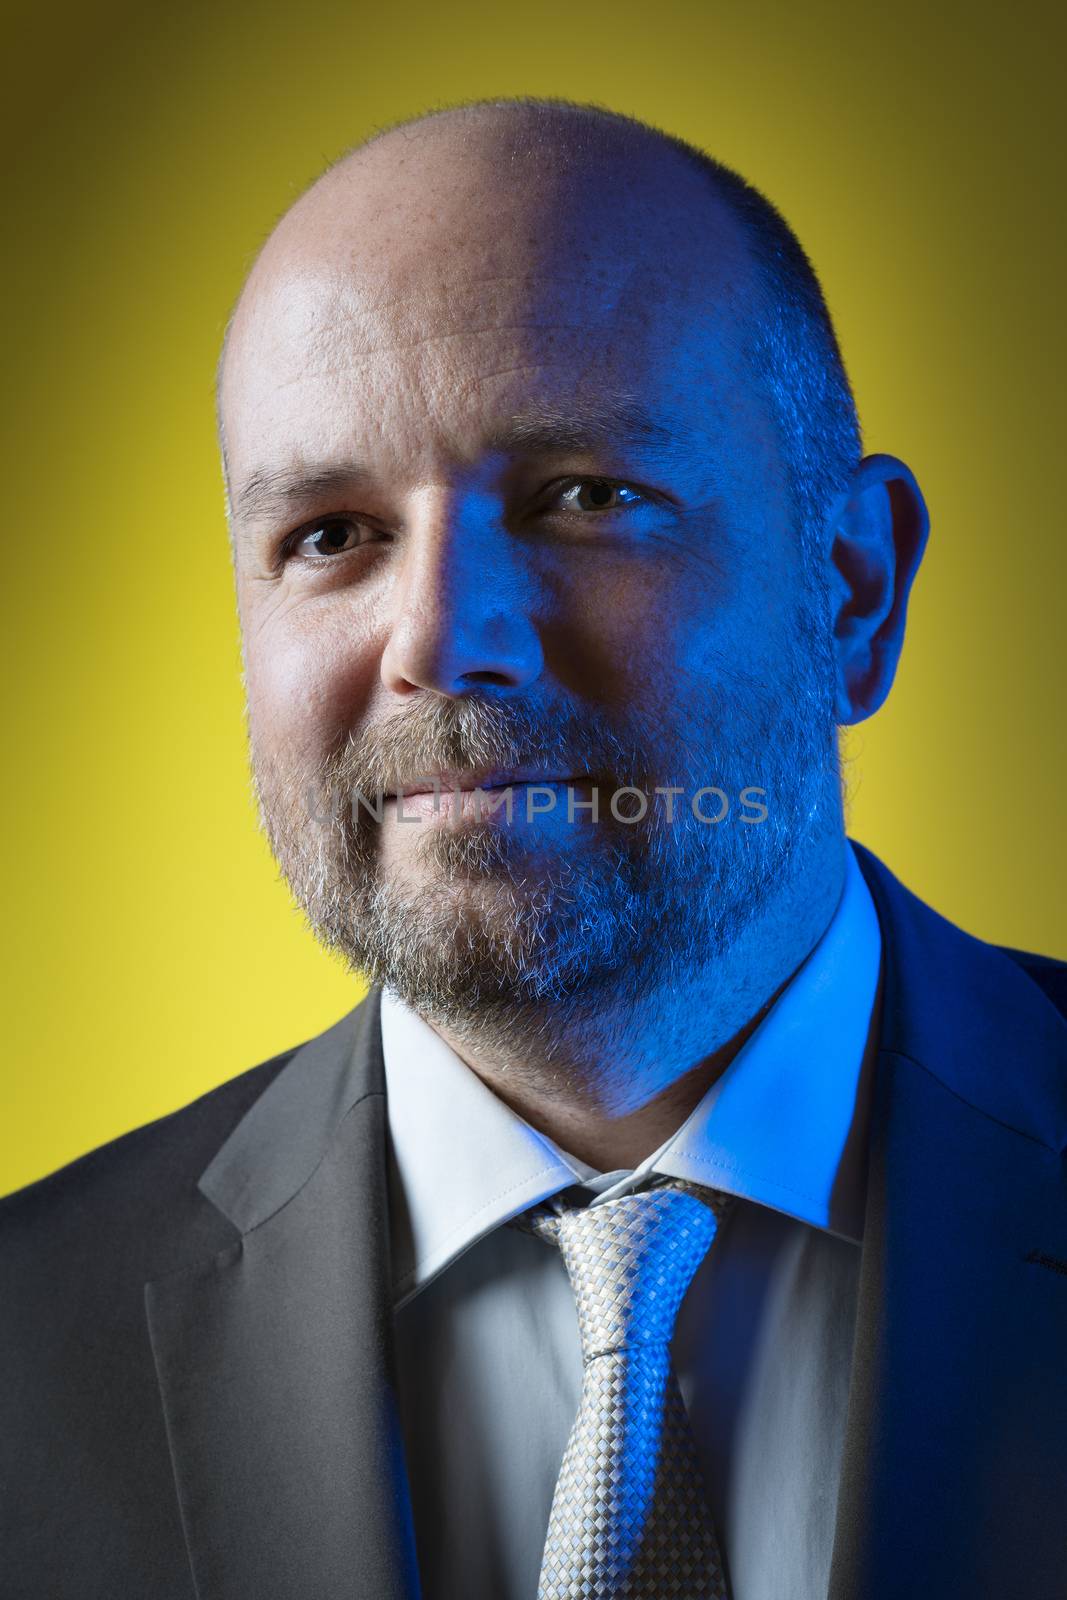 Businessman blue illuminated in dark suit and tie against yellow background